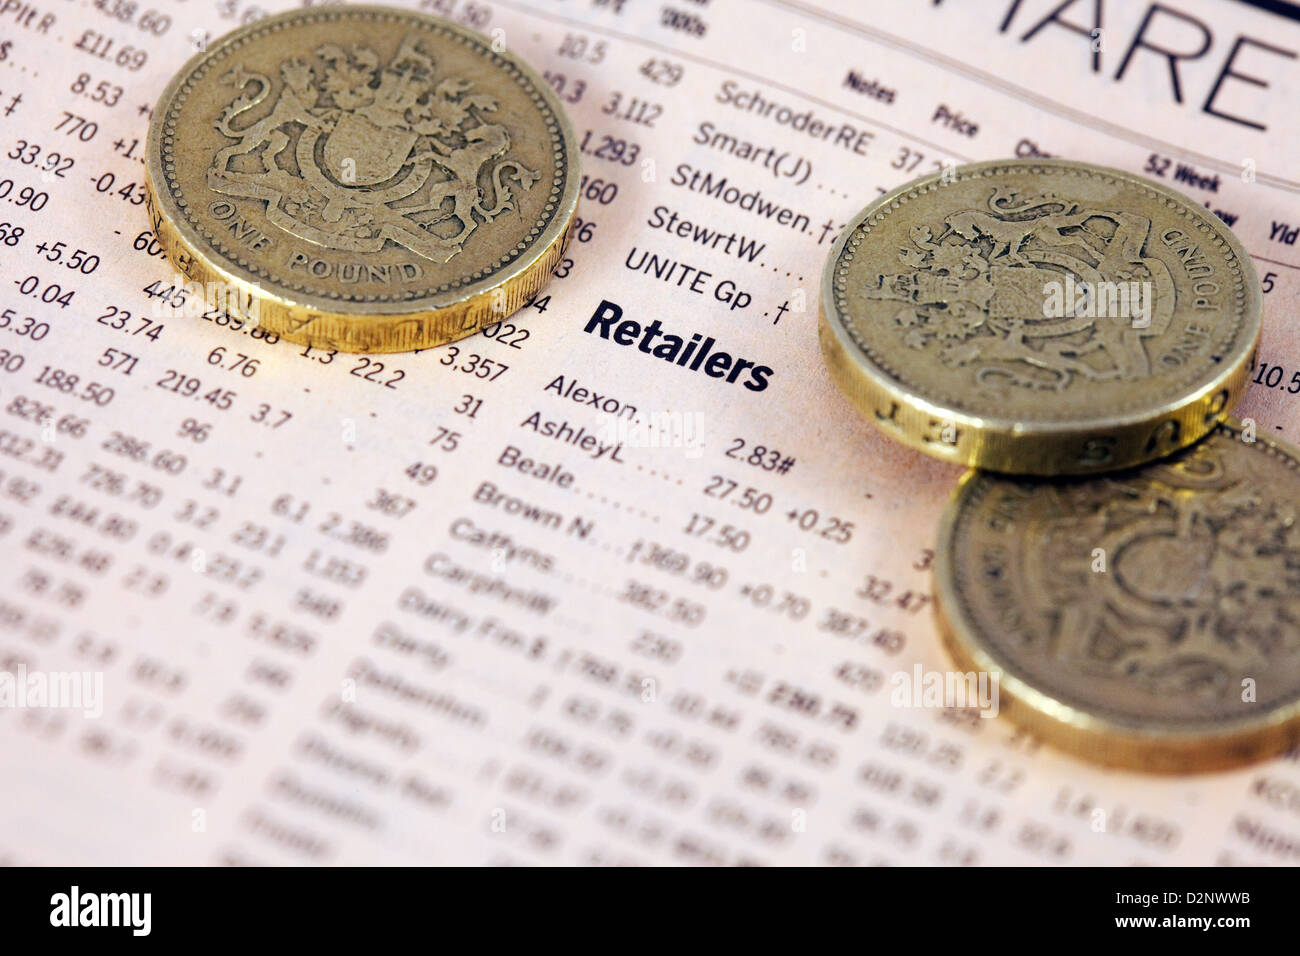 Retailers stocks and shares in the Financial Times newspaper with pound coins - concept of the value of retail shares, UK Stock Photo